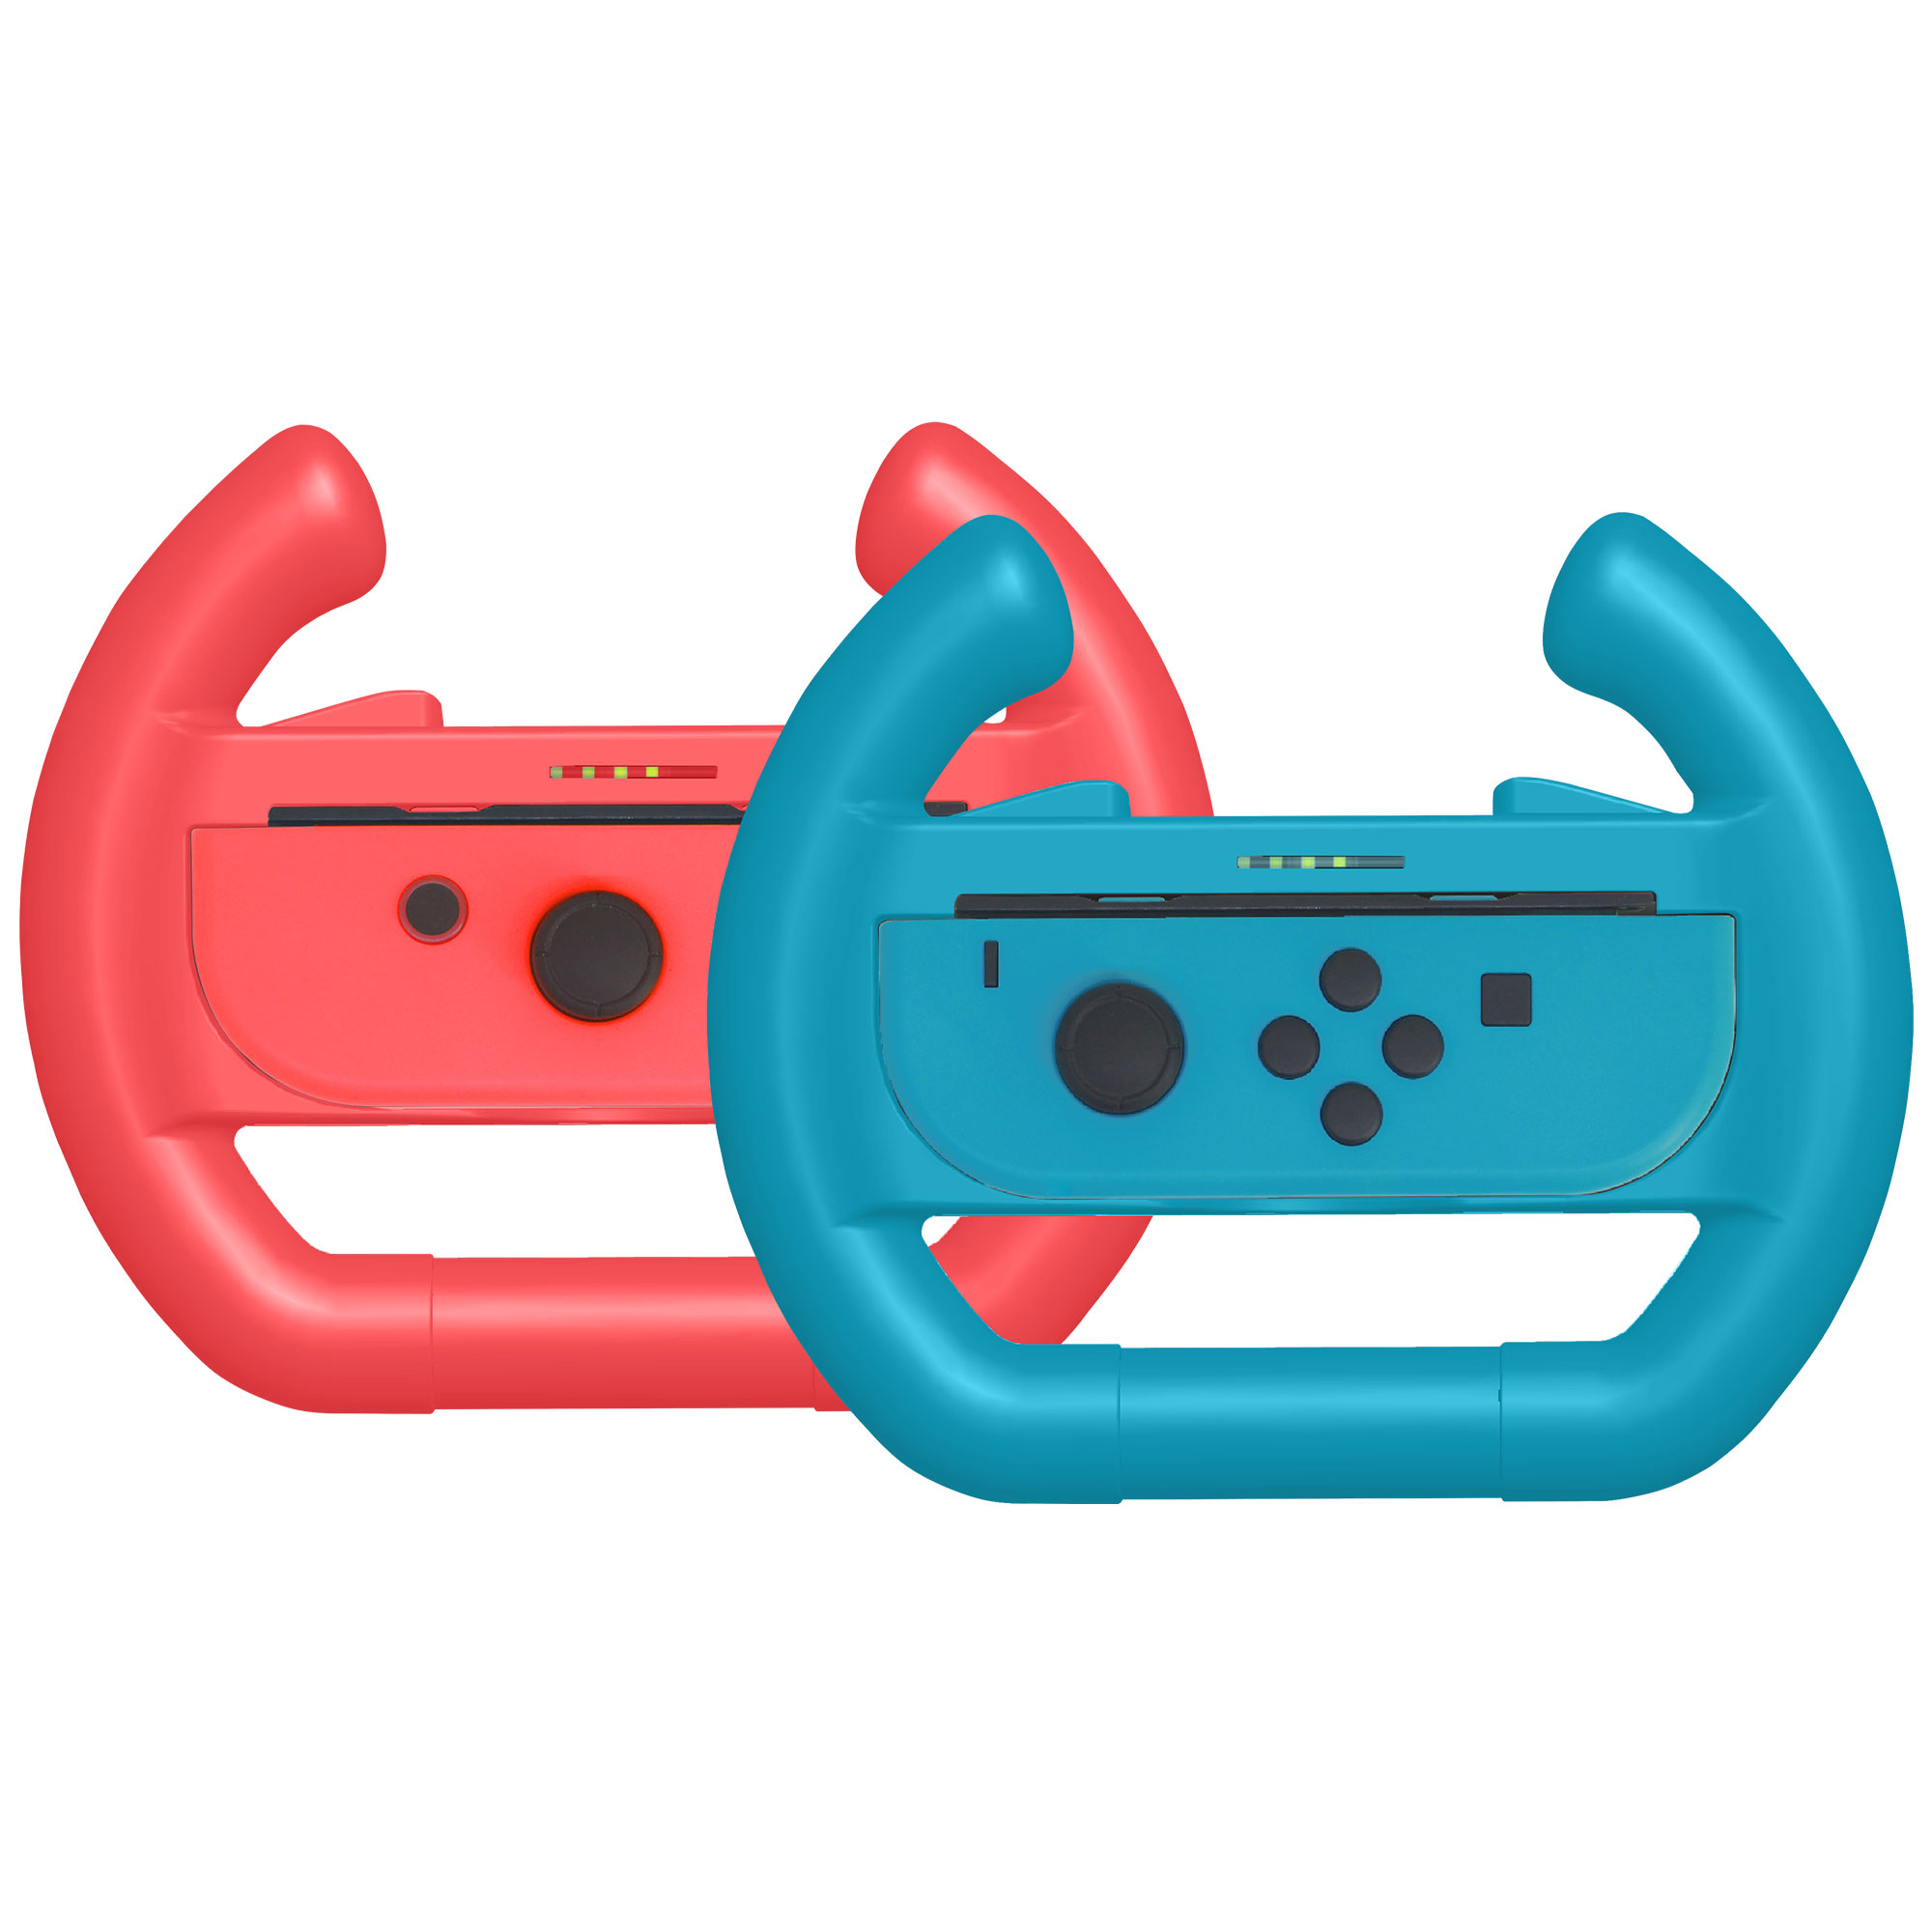 Pack of 2 steering wheels for Nintendo Switch Joy-con